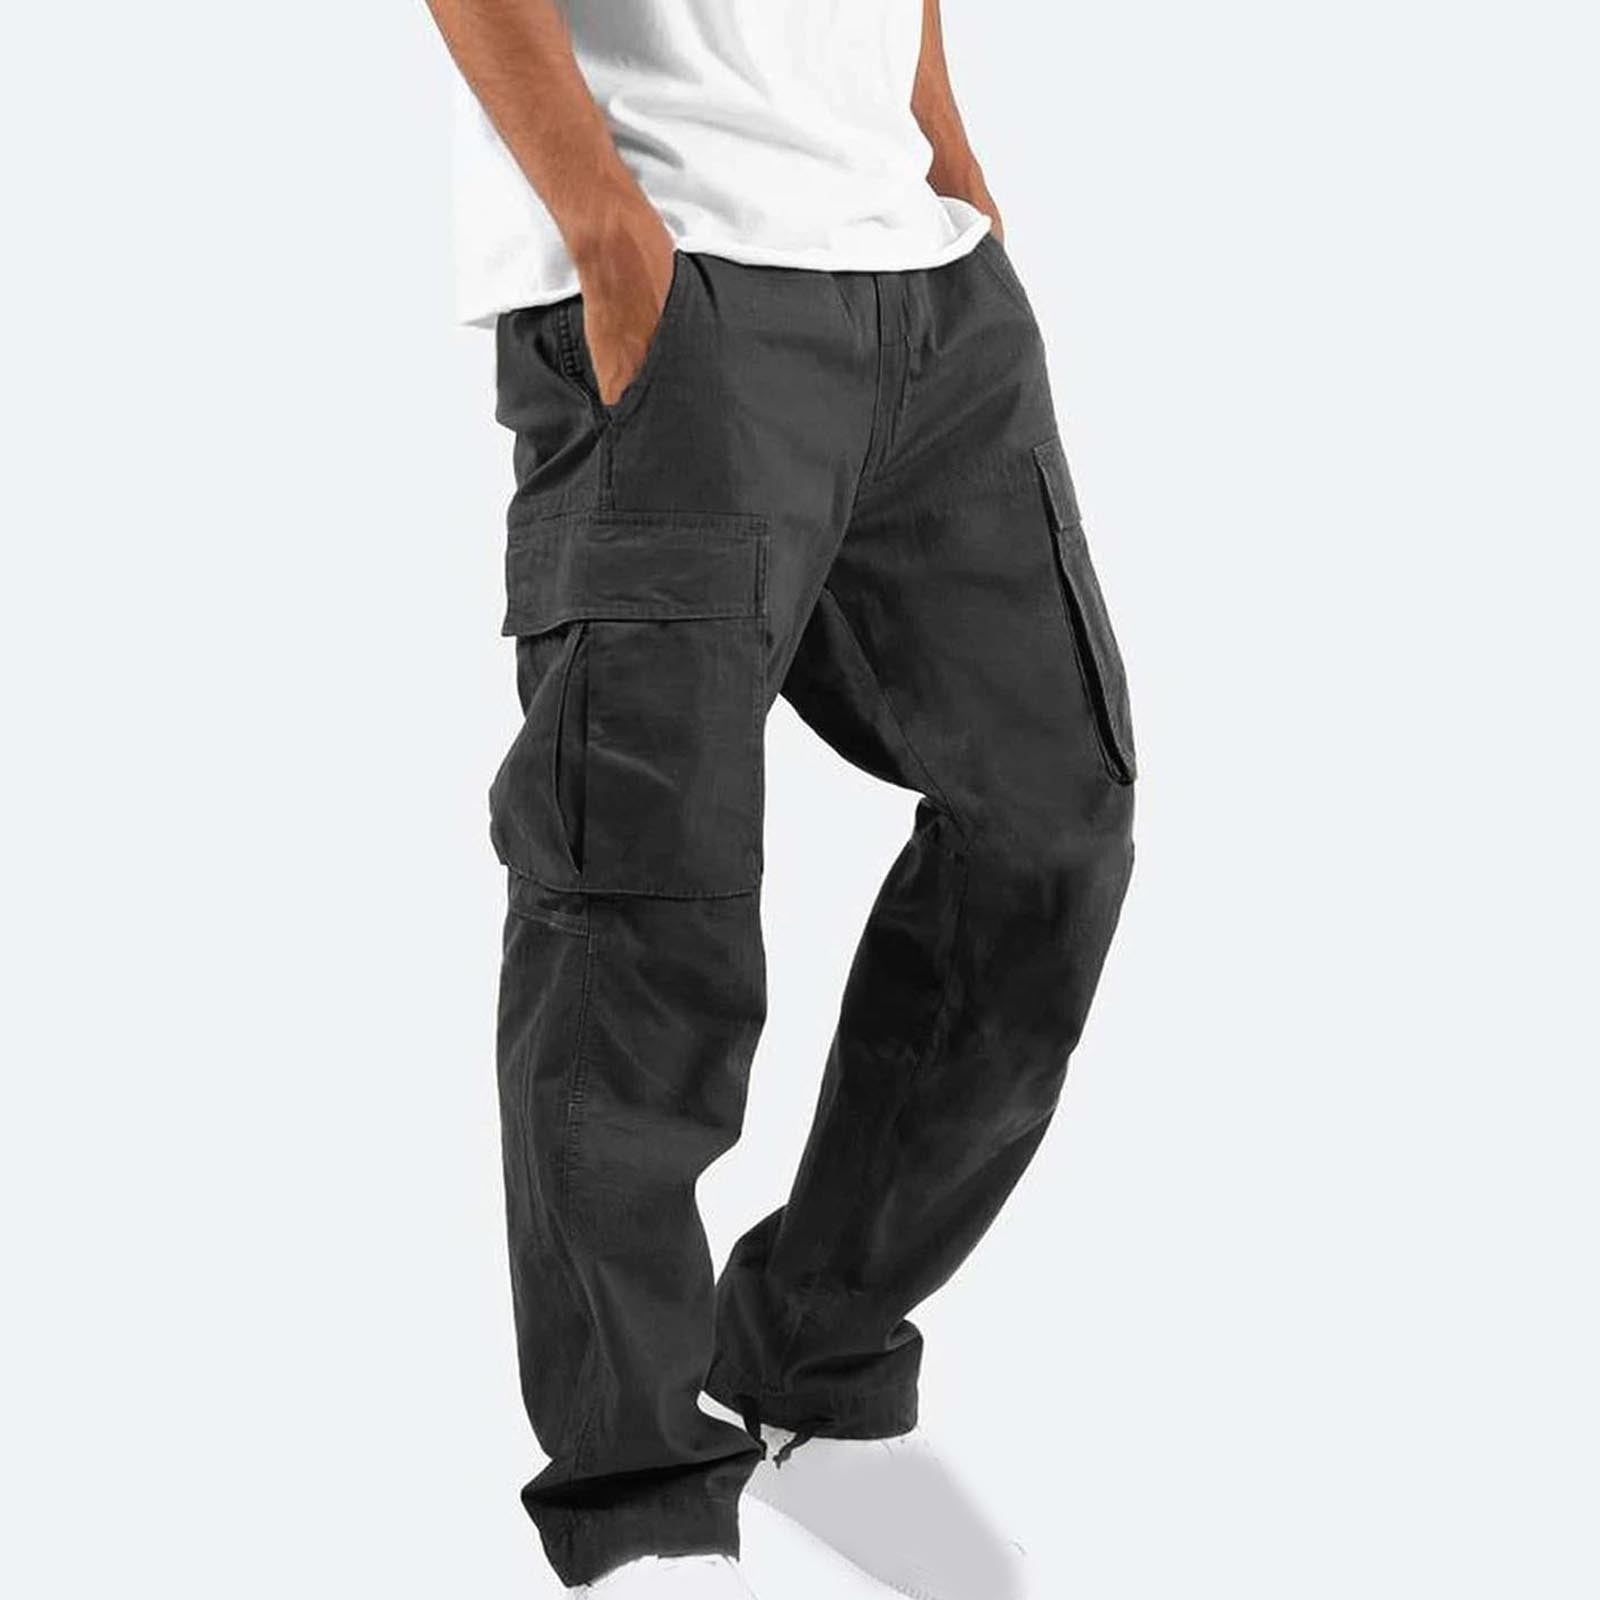 YWDJ Joggers for Men Slim Fit Men Loose Overalls Trousers Night